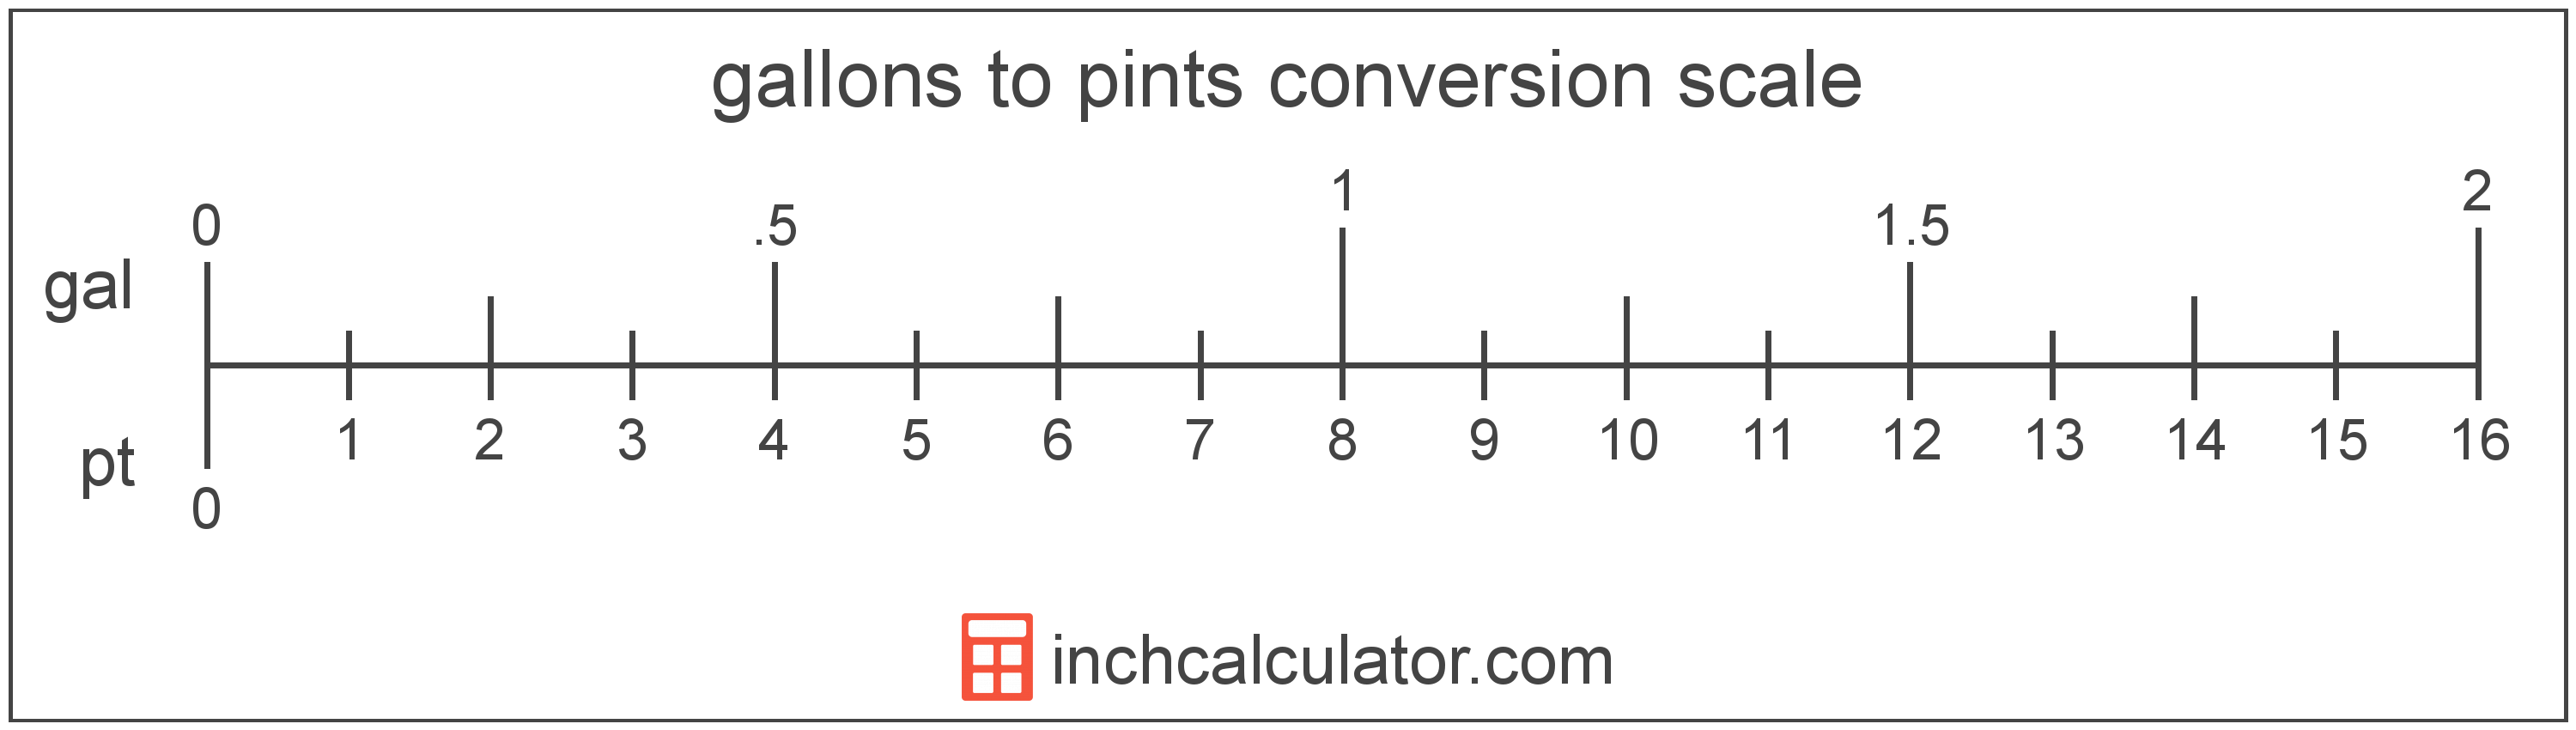 pints-to-gallons-conversion-pt-to-gal-inch-calculator